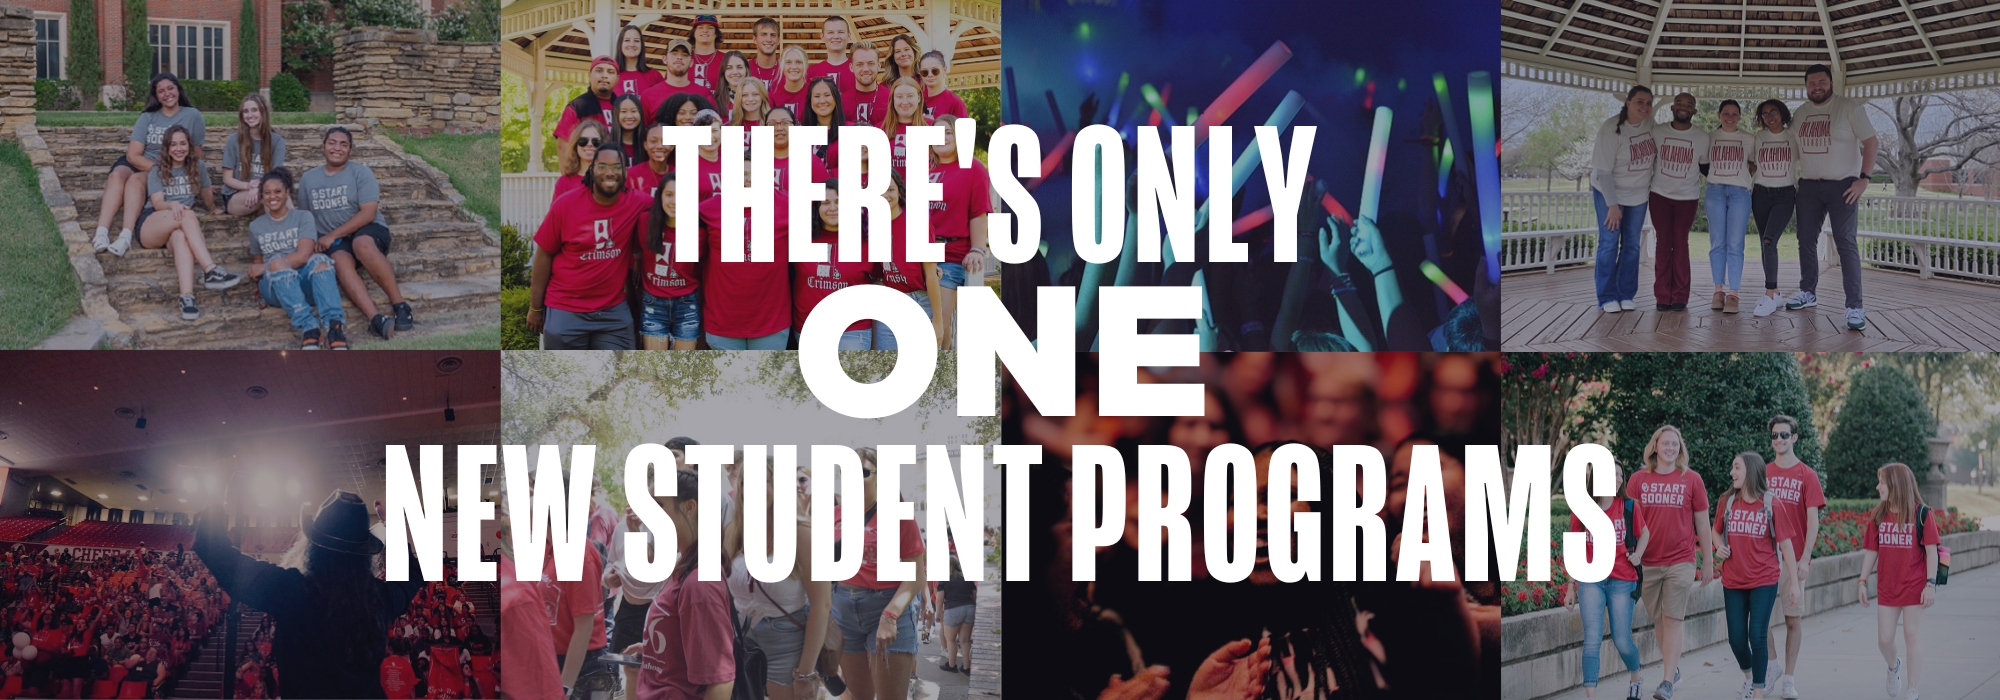 Collage of program photos. There's only one new student programs.